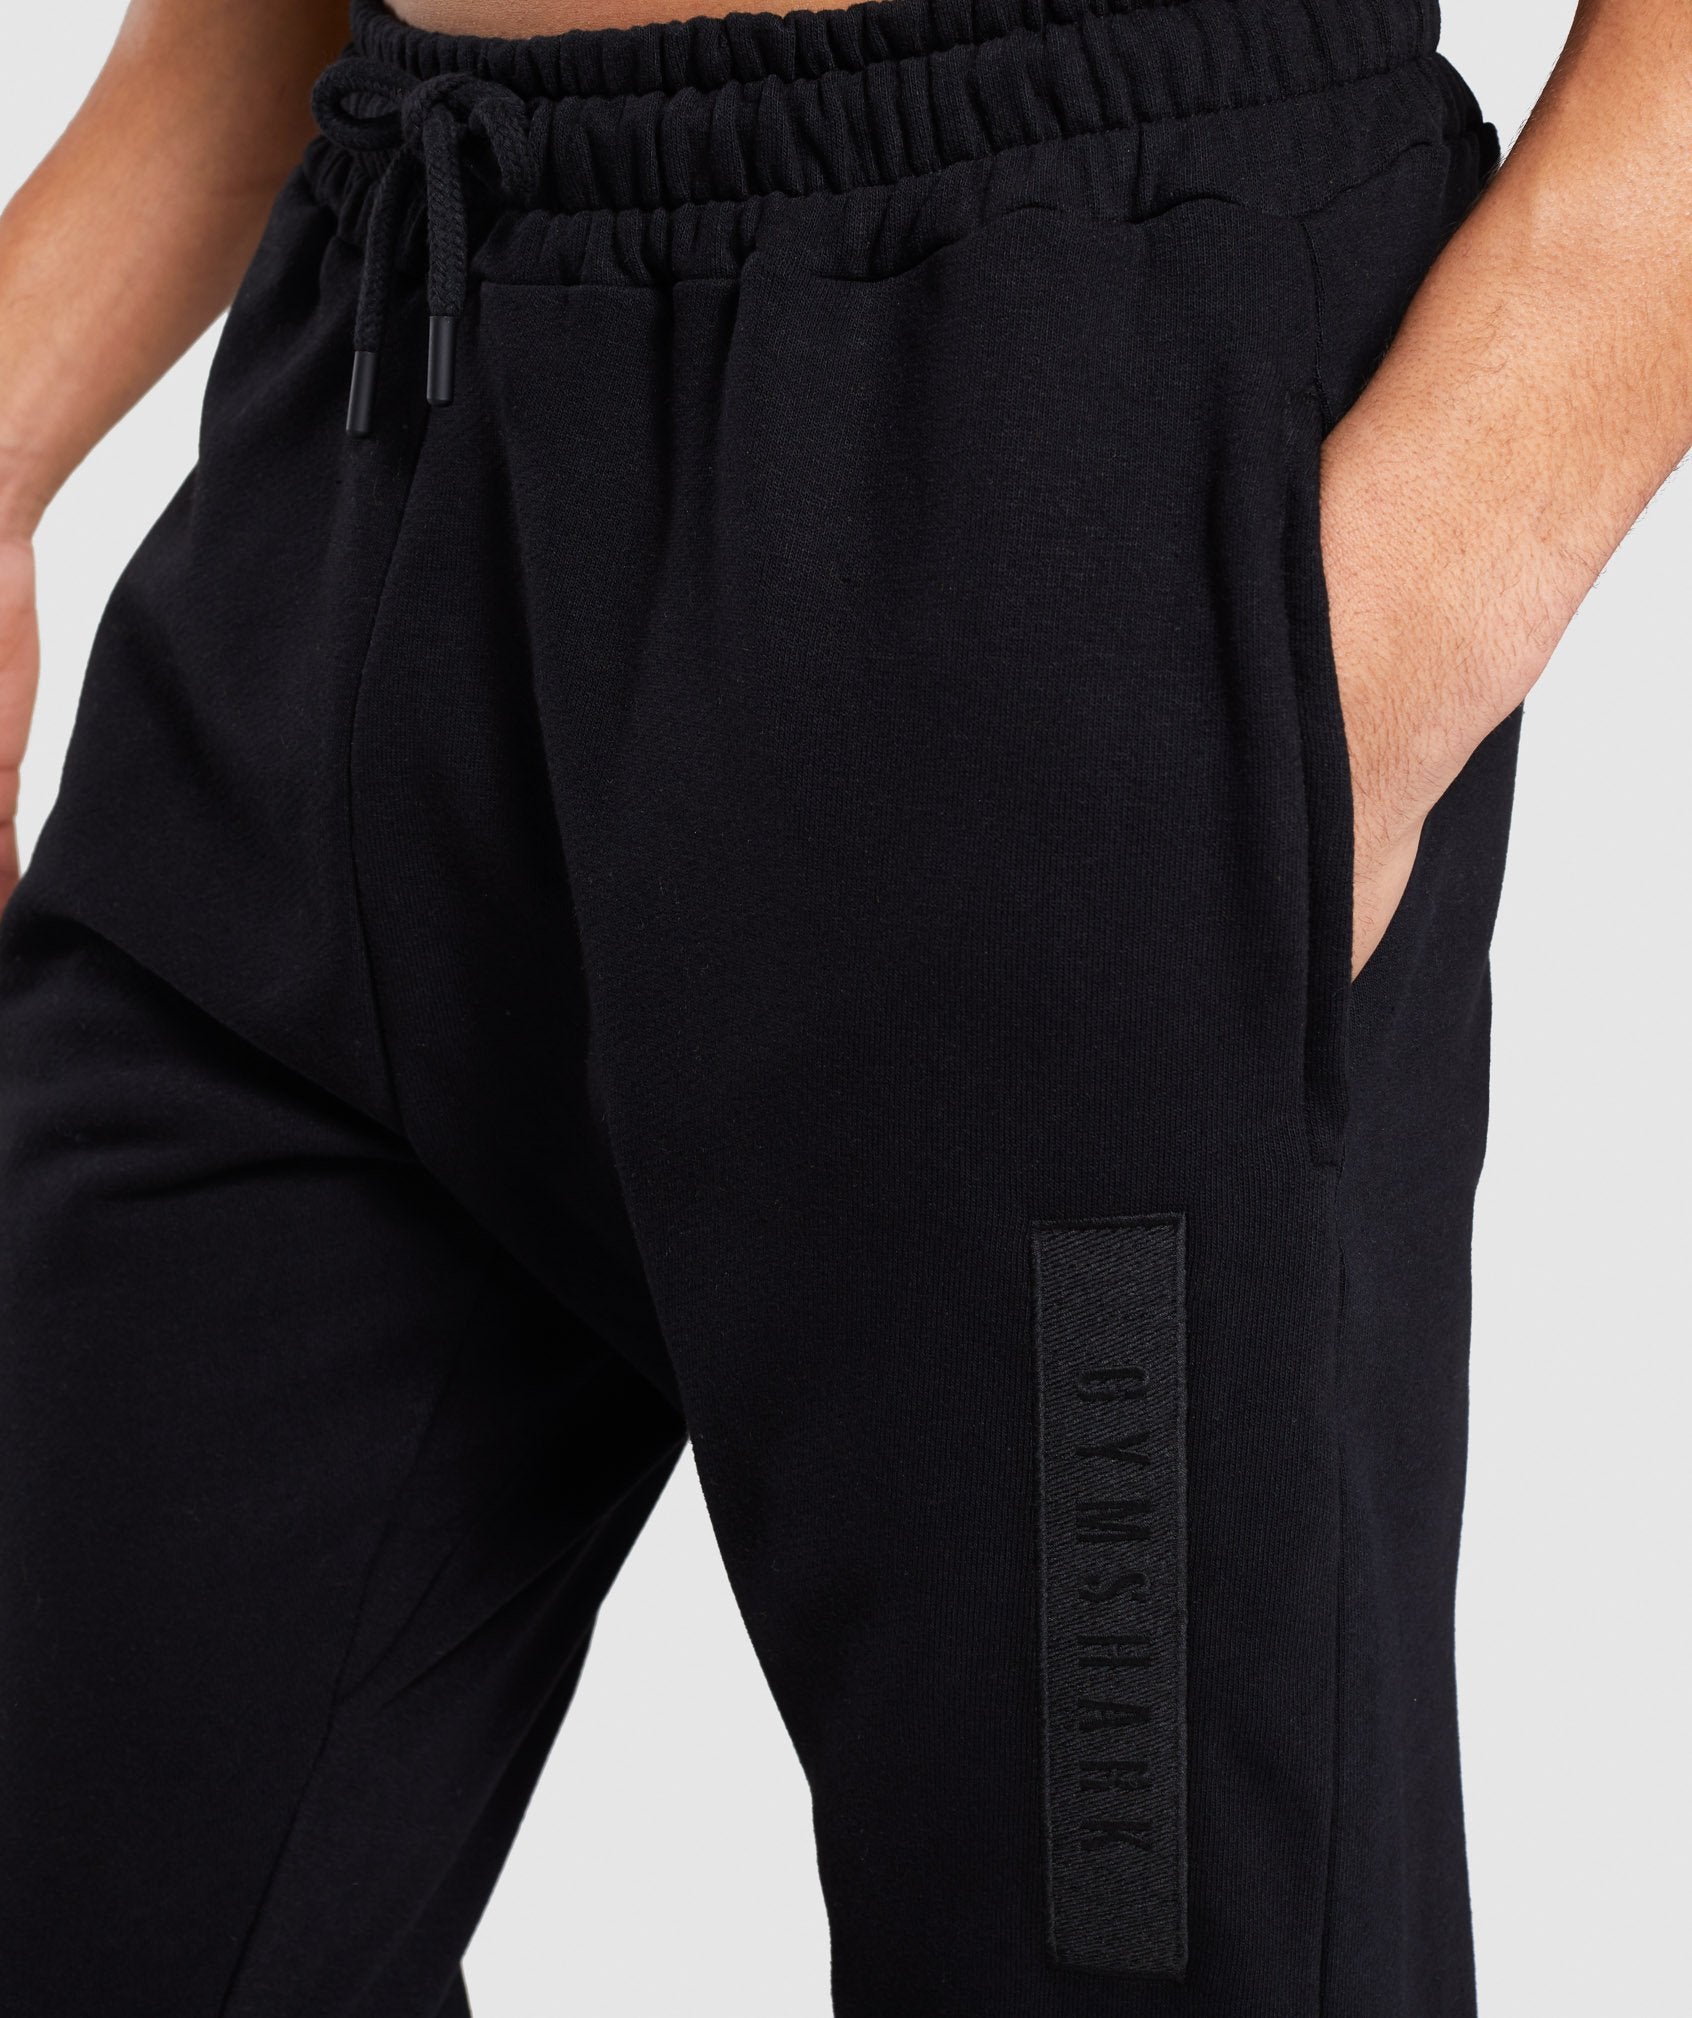 Crucial Jogger in Black - view 6